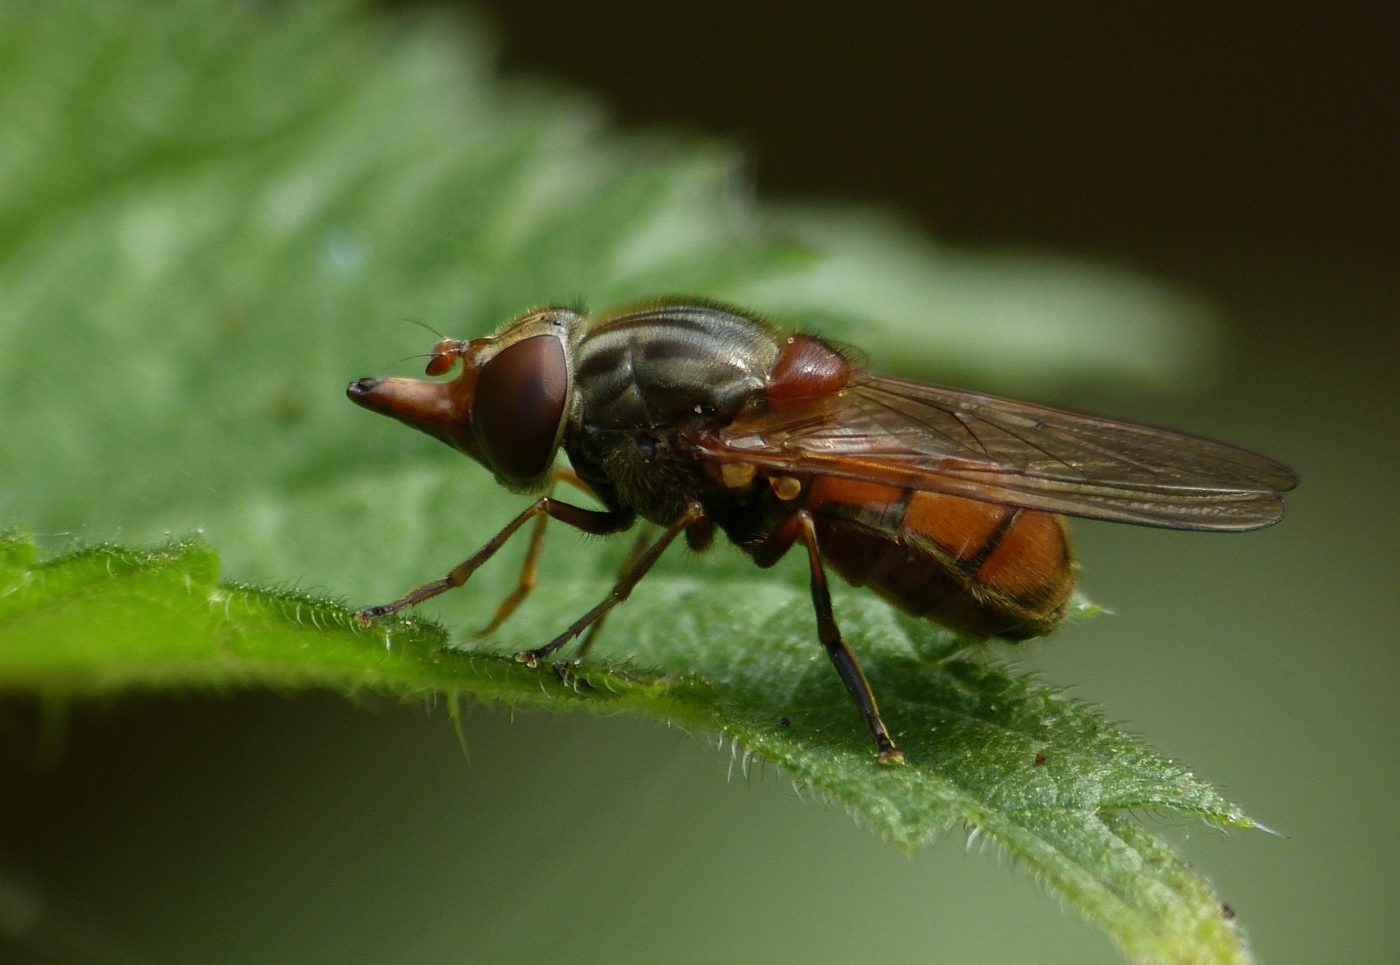 Common snout-hoverfly, Rhingia campestris, on a green leaf